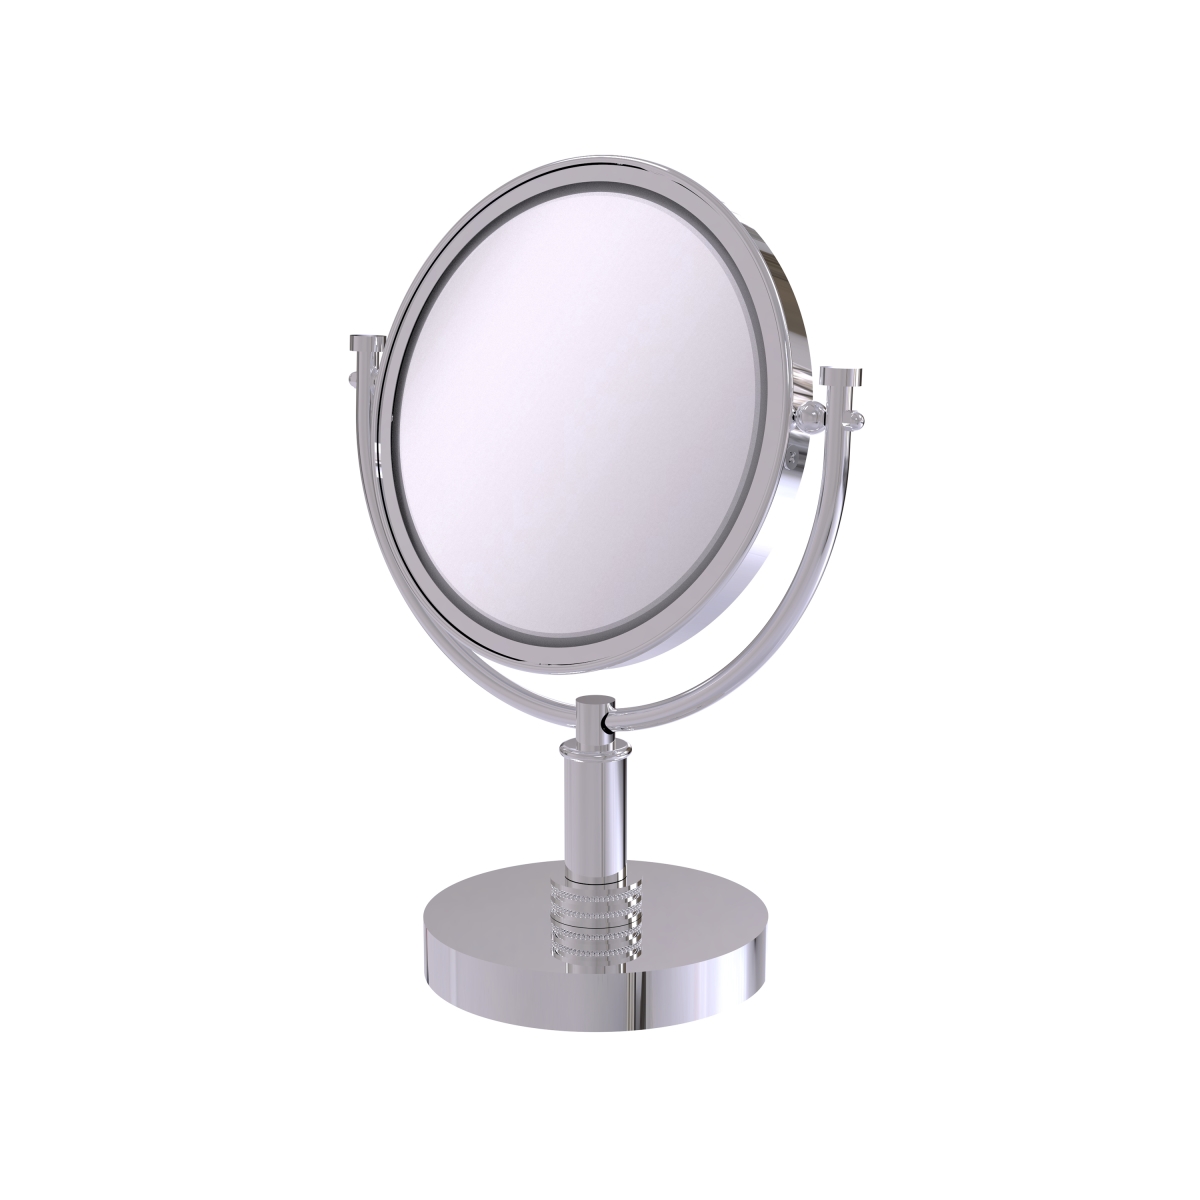 Picture of Allied Brass DM-4D-2X-PC 8 in. Vanity Top Make-Up Mirror 2X Magnification, Polished Chrome - 15 x 8 x 8 in.